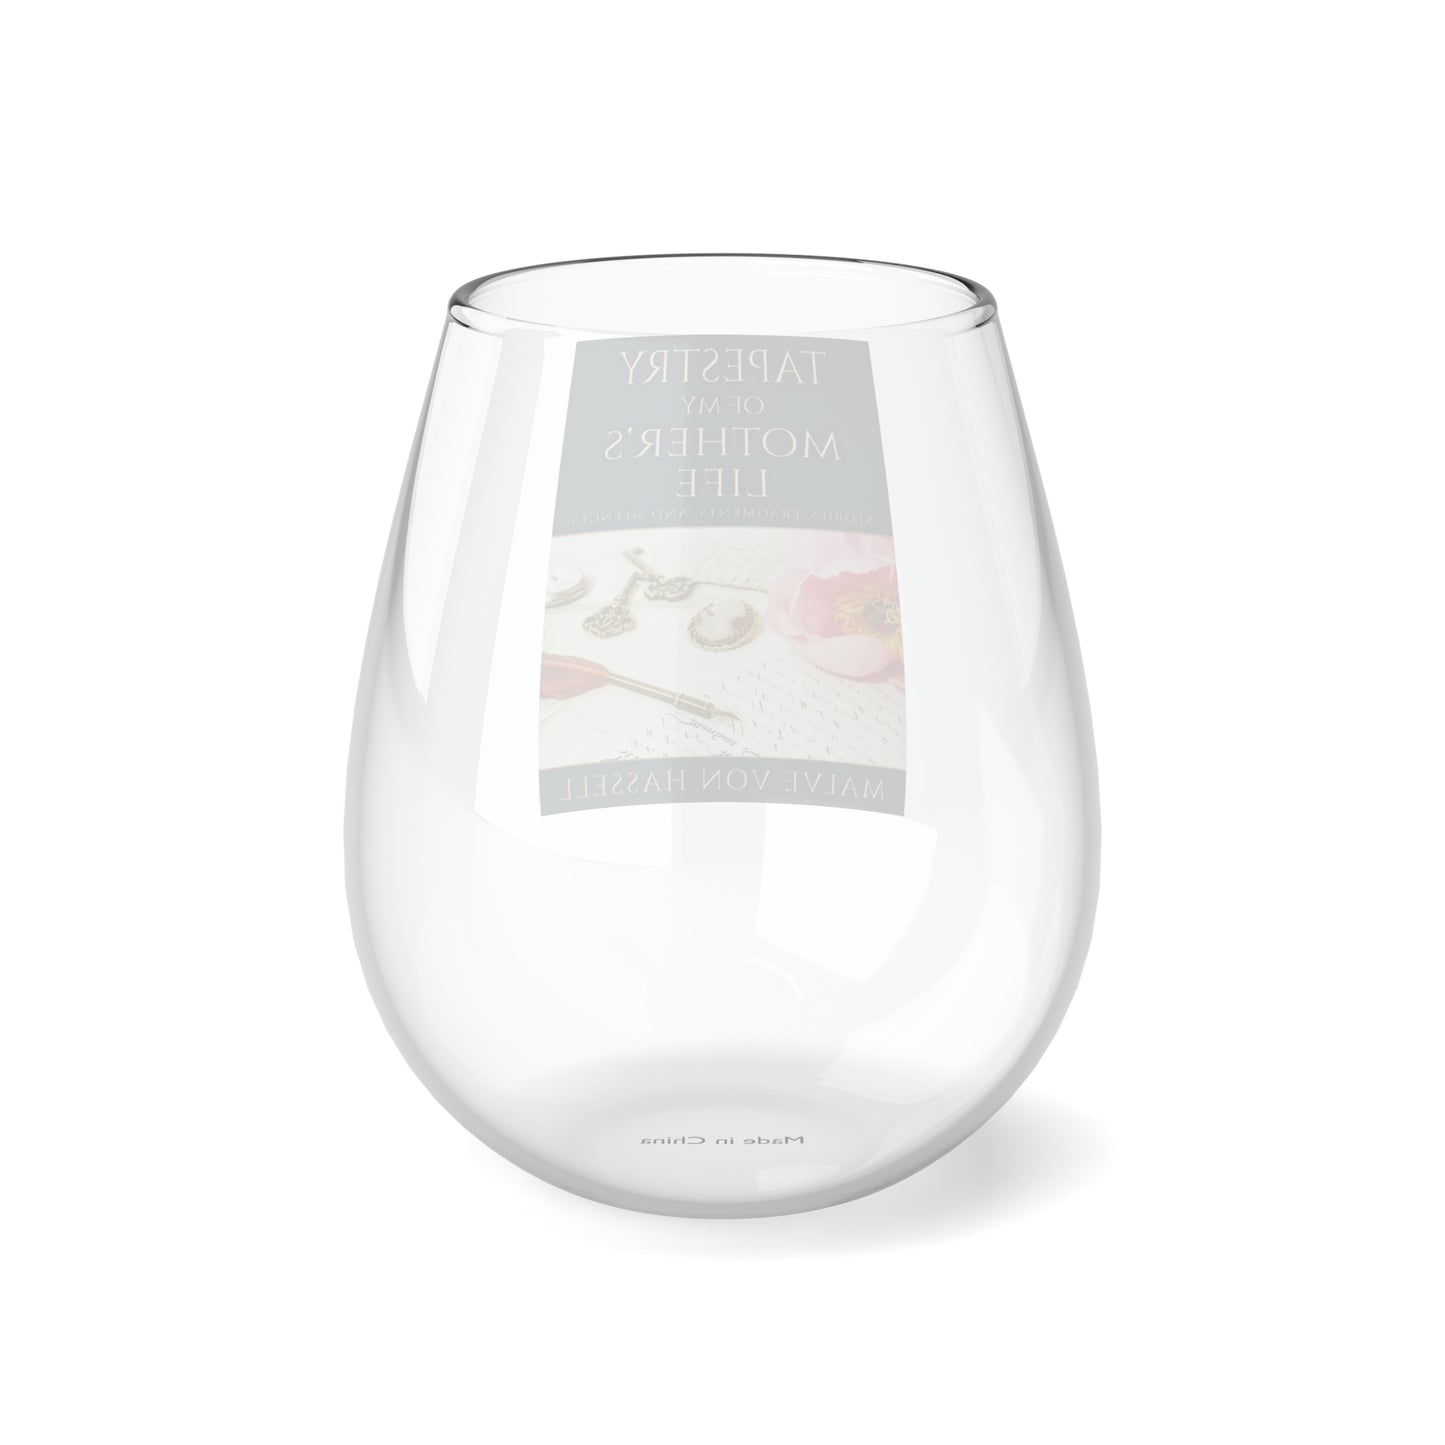 Tapestry Of My Mother’s Life - Stemless Wine Glass, 11.75oz